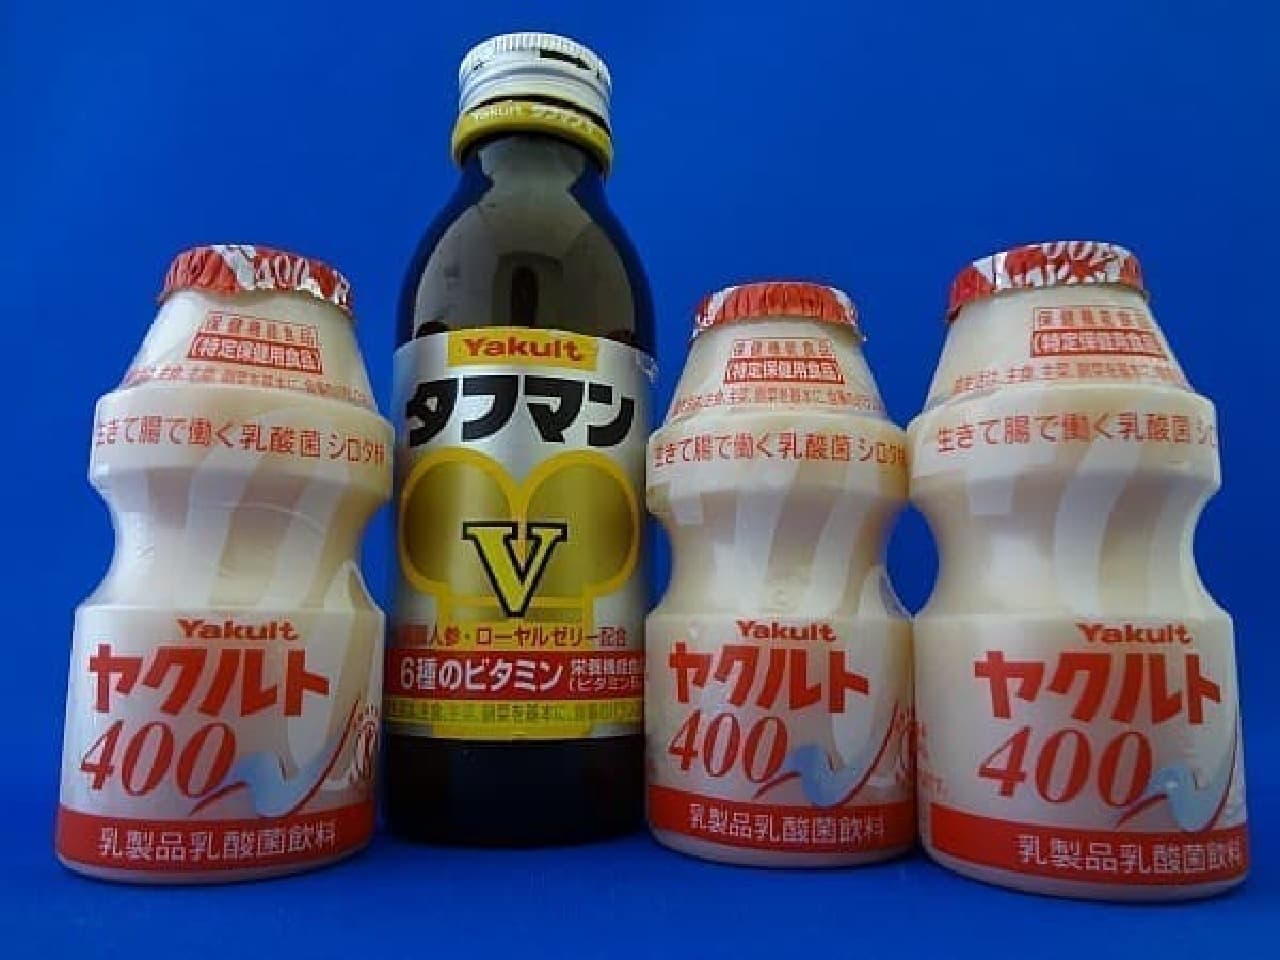 "Yakult" and "Toughman", which are the raw materials for "Yakult"